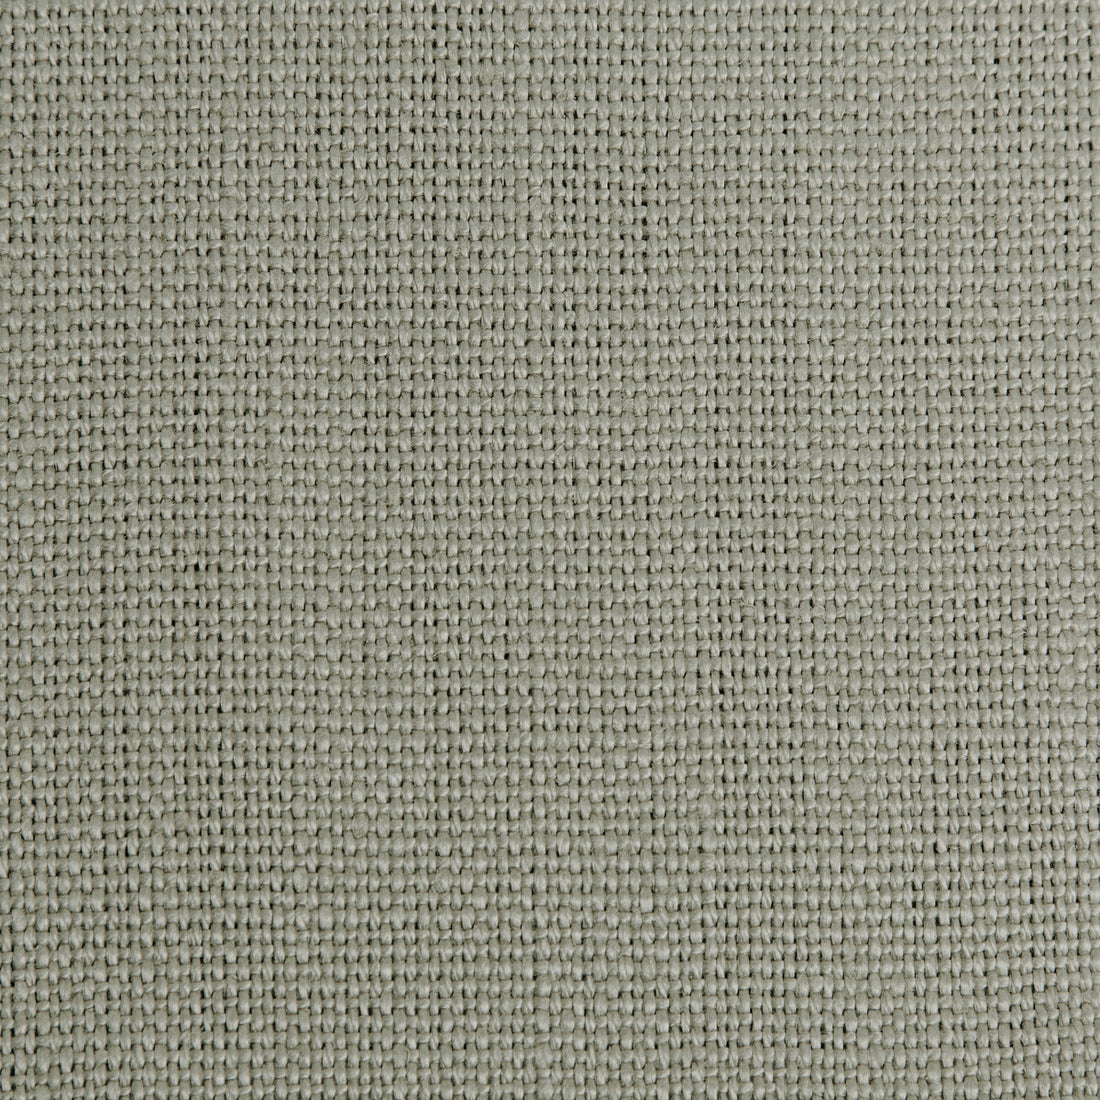 Stone Harbor fabric in cement color - pattern 27591.1121.0 - by Kravet Basics